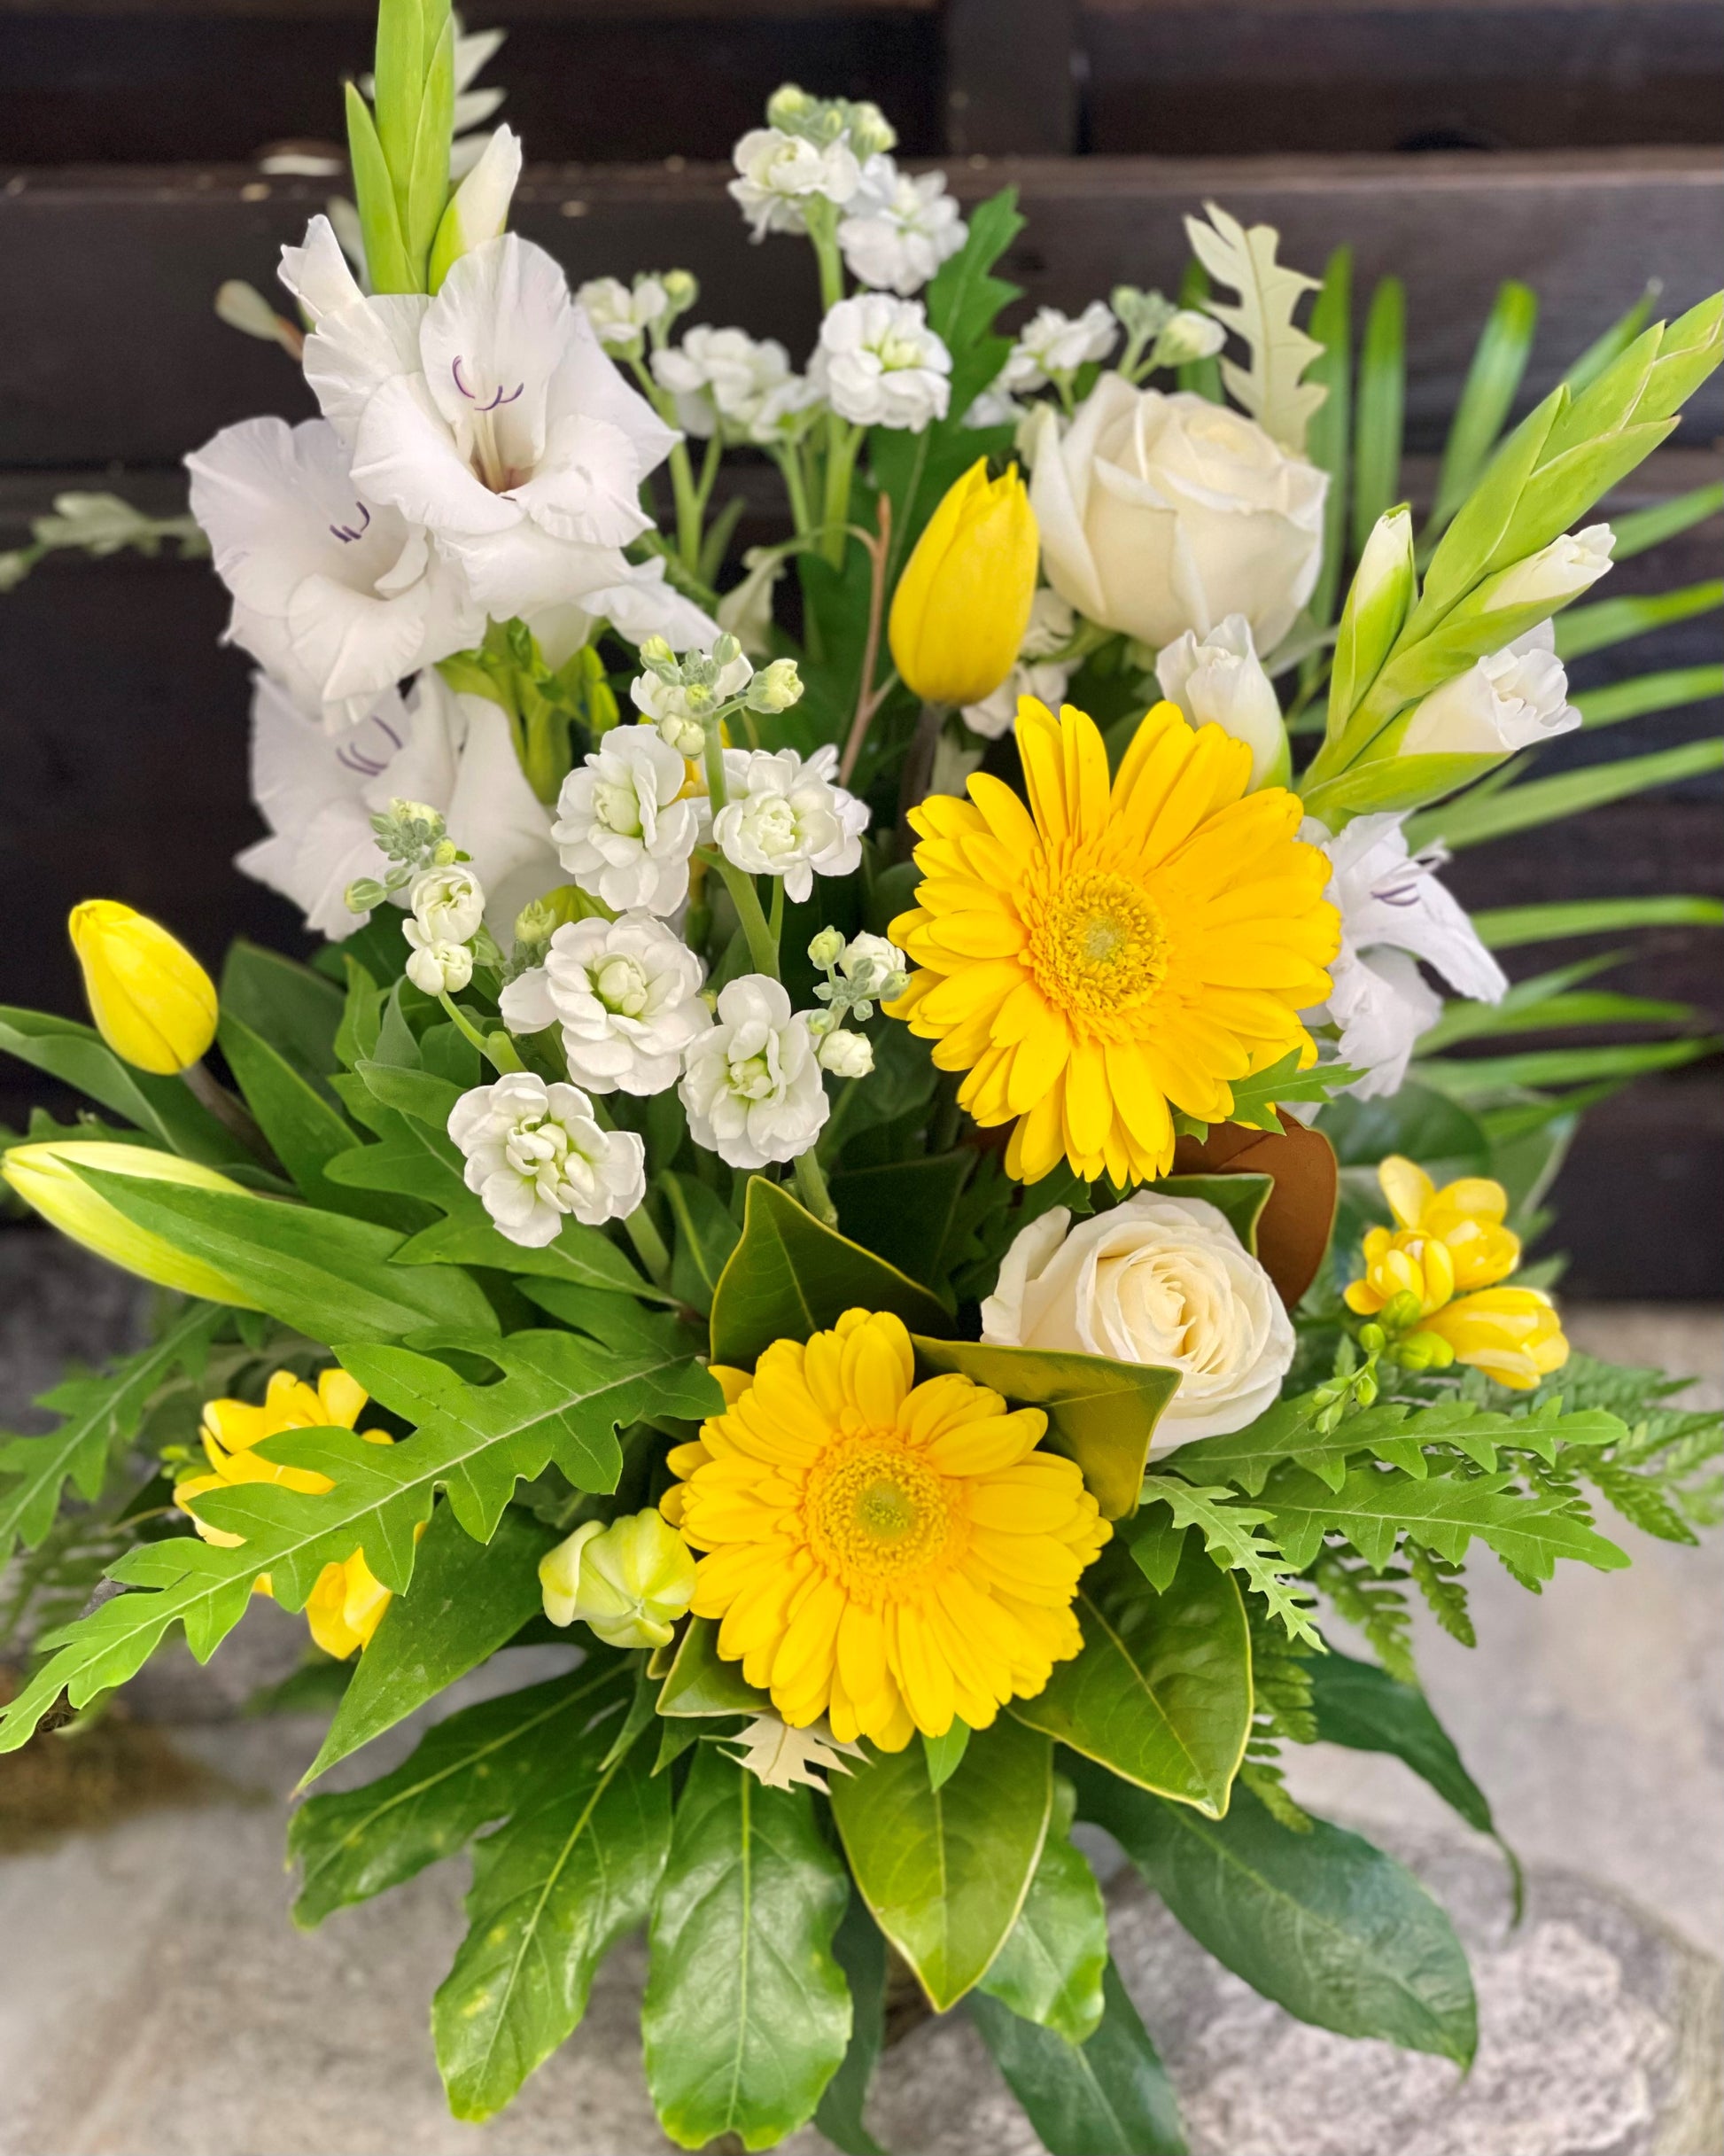 Flowersetc, Floral, Bouquet, Flowers, Gifts, Posy, Posey, Wellington, Lower Hutt, Upper Hutt, Petone, Eastbourne, Bright, Pastel, Florist, Florists, Creative, Flair, custom, bespoke, bunch, bunches, scent, plants, Indoor, wedding, sympathy, funeral, arrangement, floral, seasonal, excellent, elegant, prestige, buttonhole, corsage, gifts for mum, gifts for girlfriend, gifts for friends